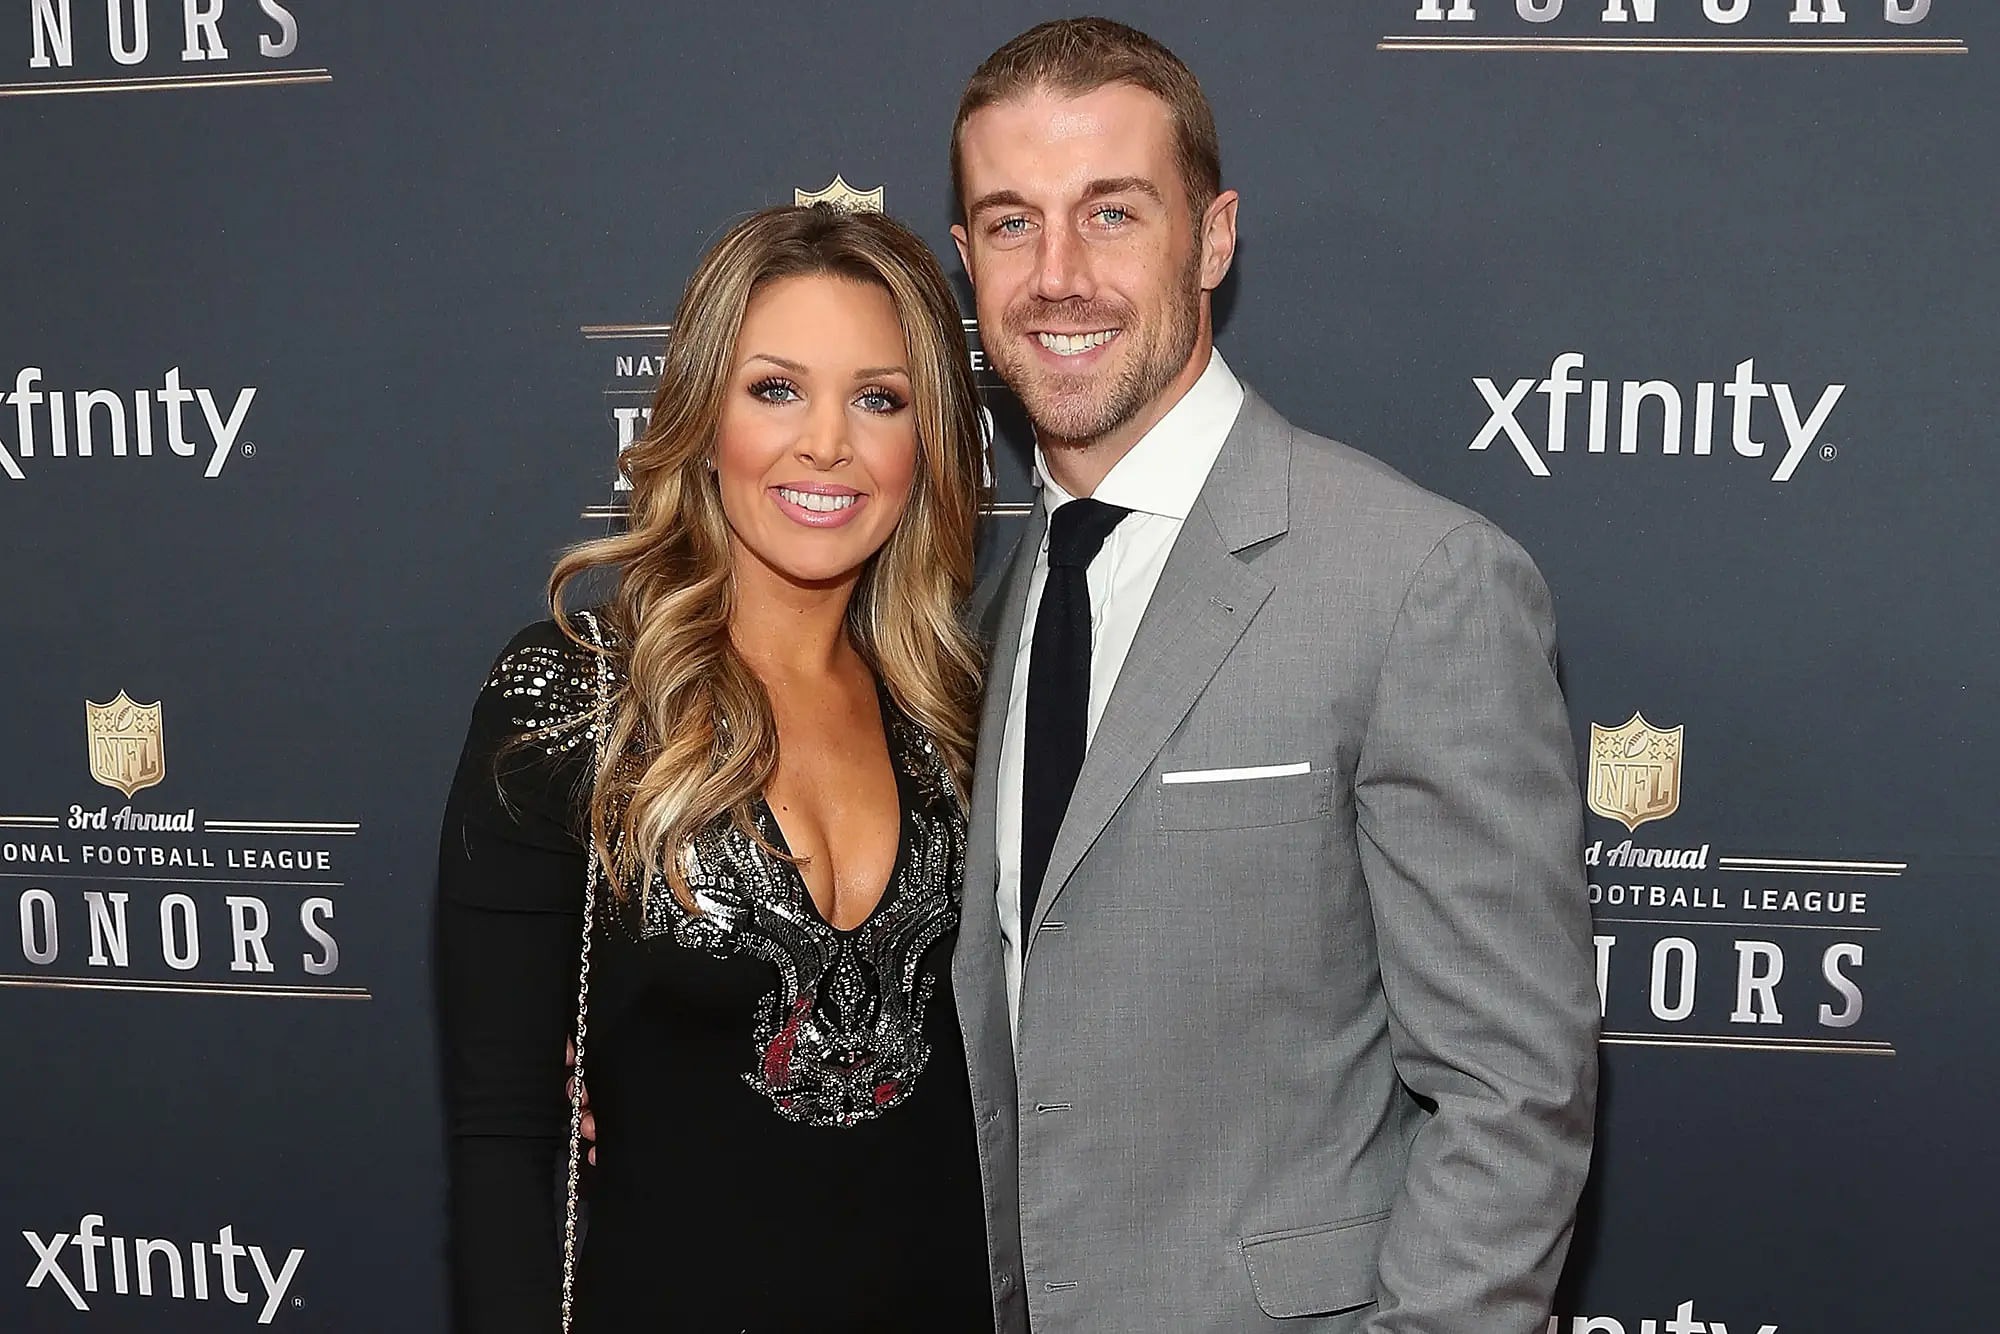 Hottest NFL Wives - TFM